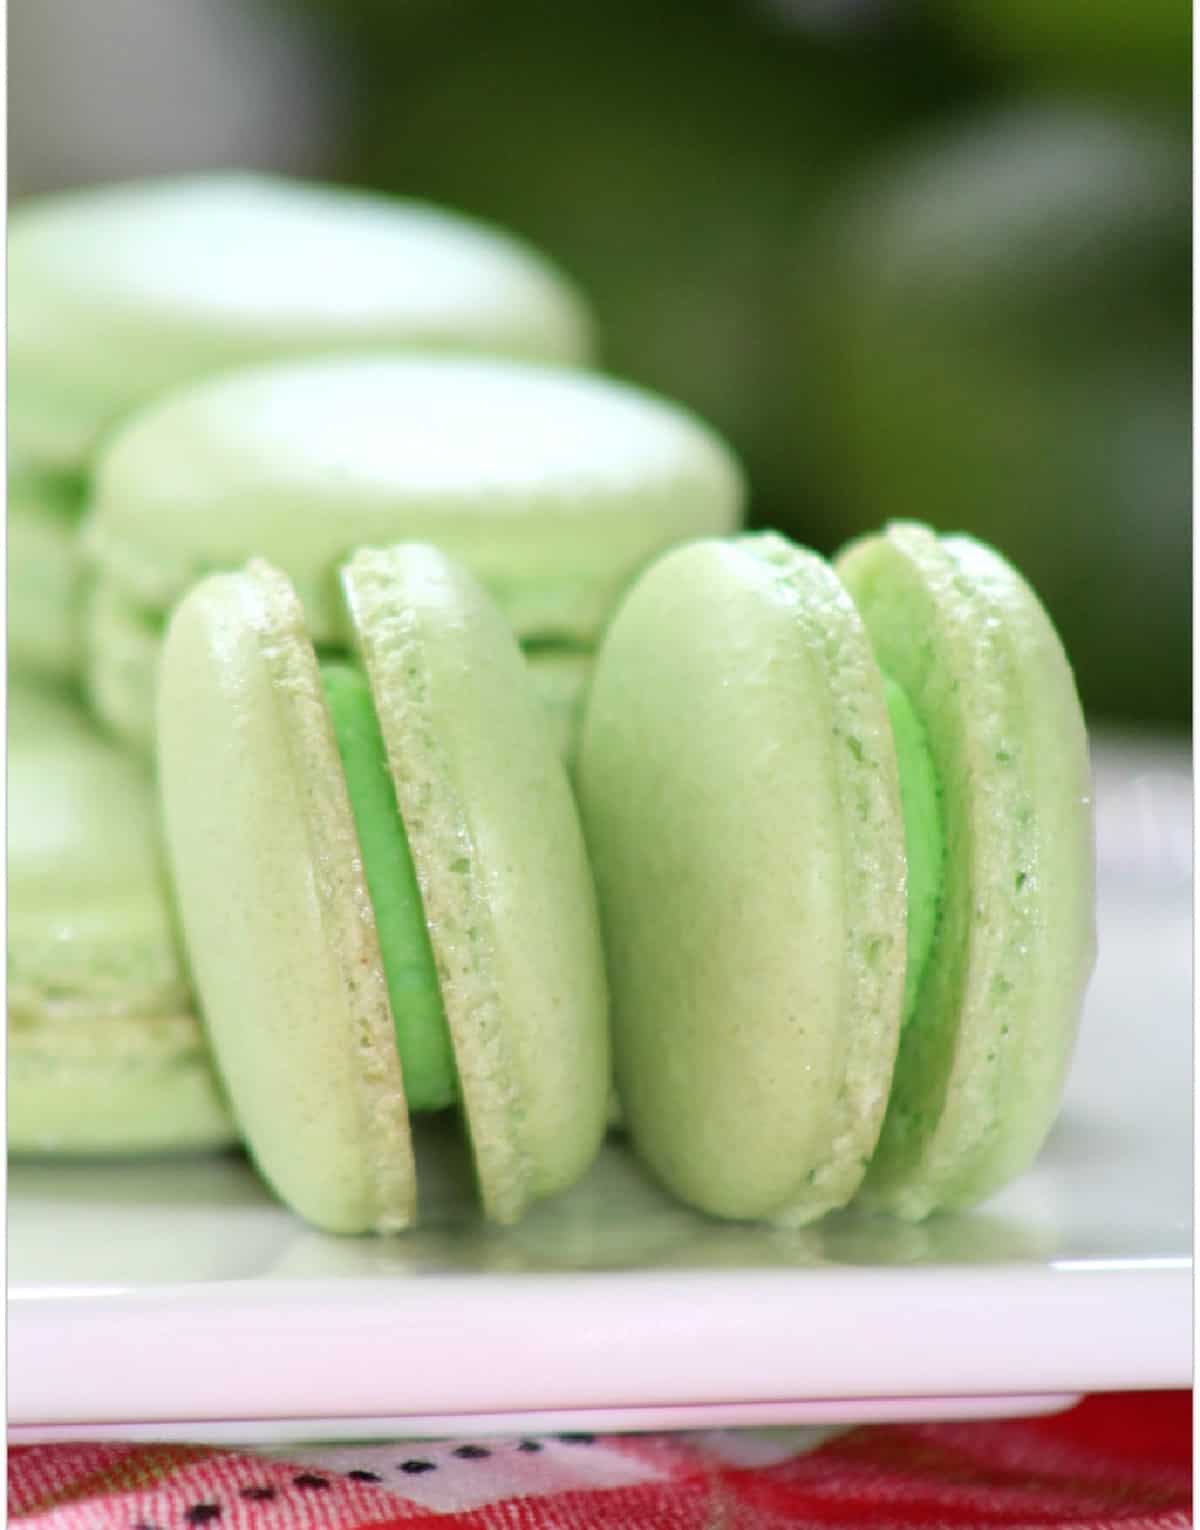 Green macarons on side on white plate on red plaid tablecloth.